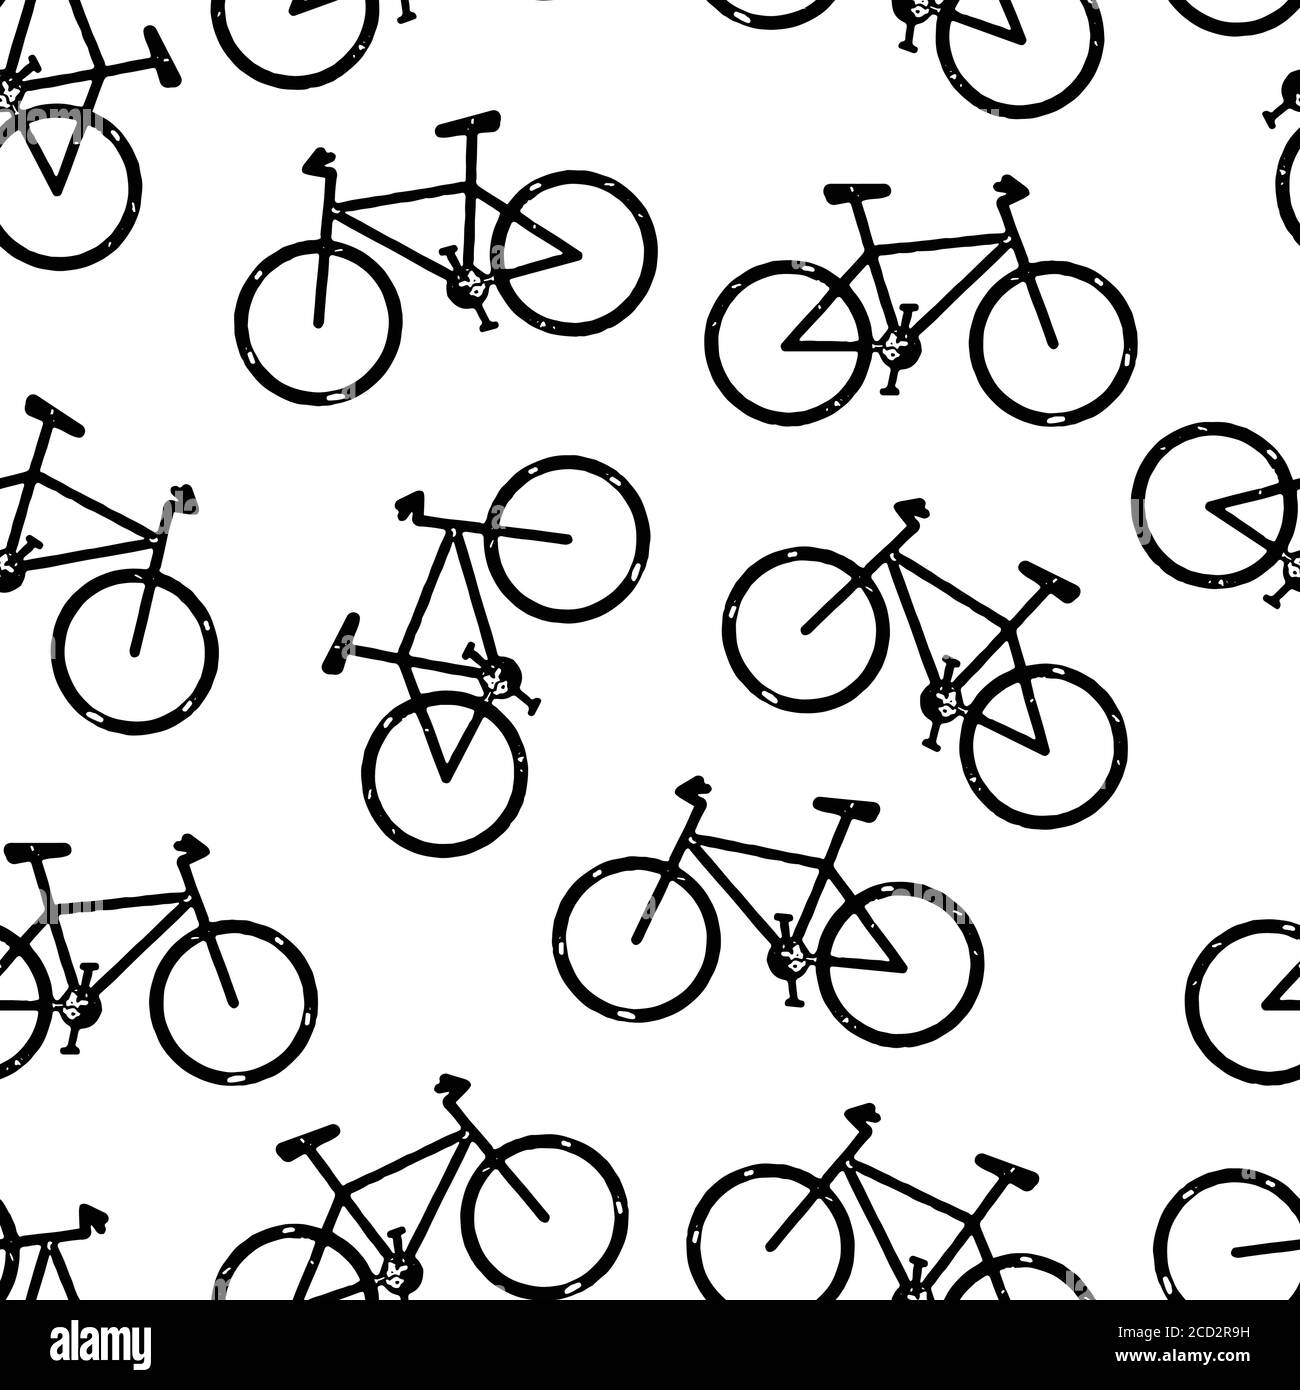 Bicycle seamless vector background. Bike pattern repeat black on ...